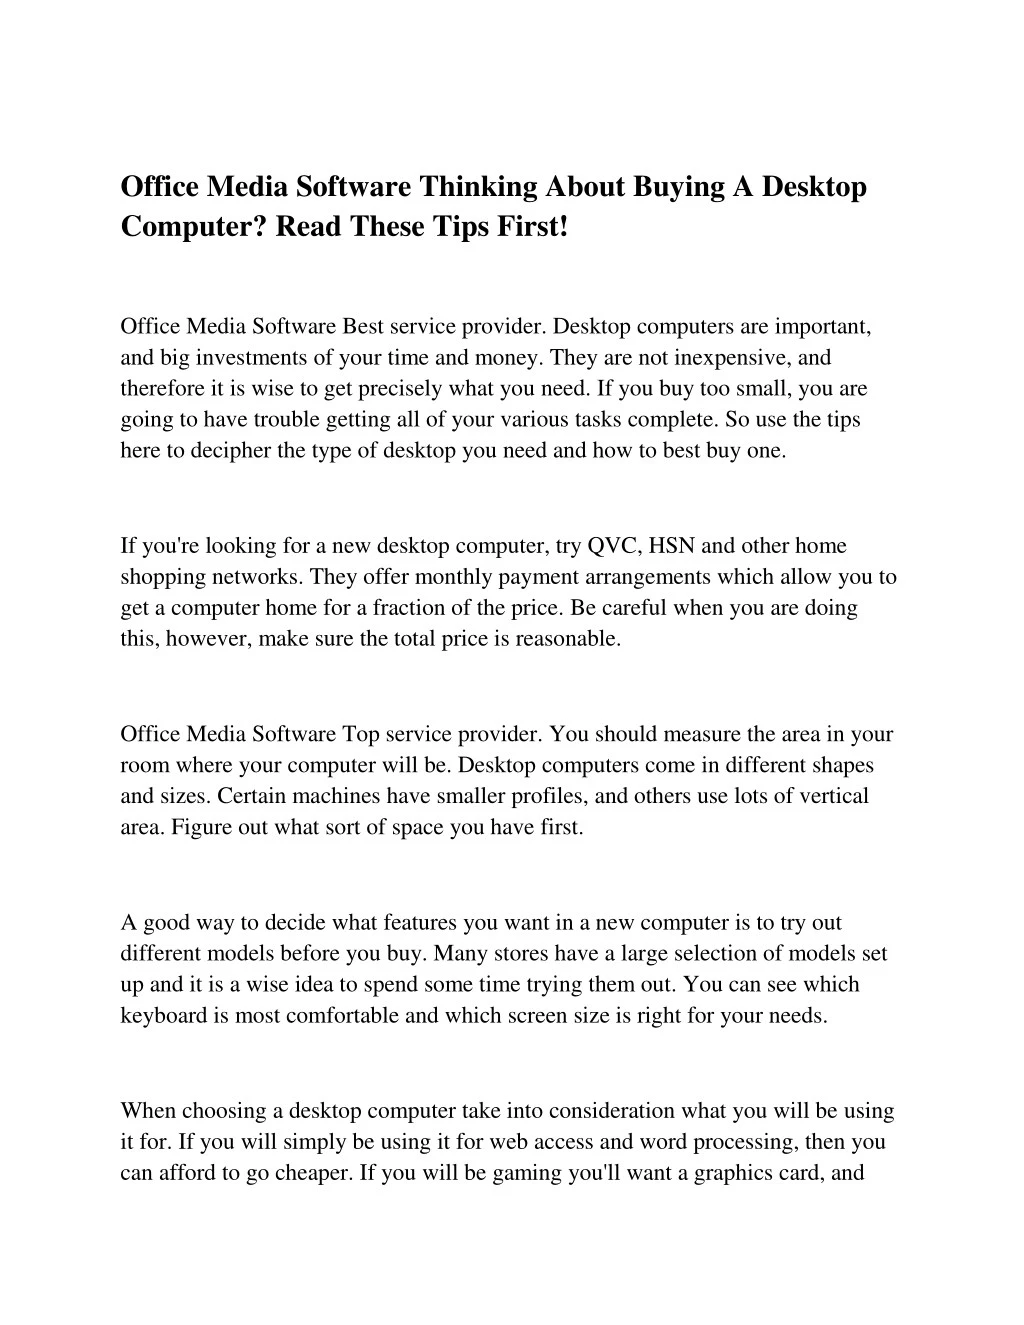 office media software thinking about buying